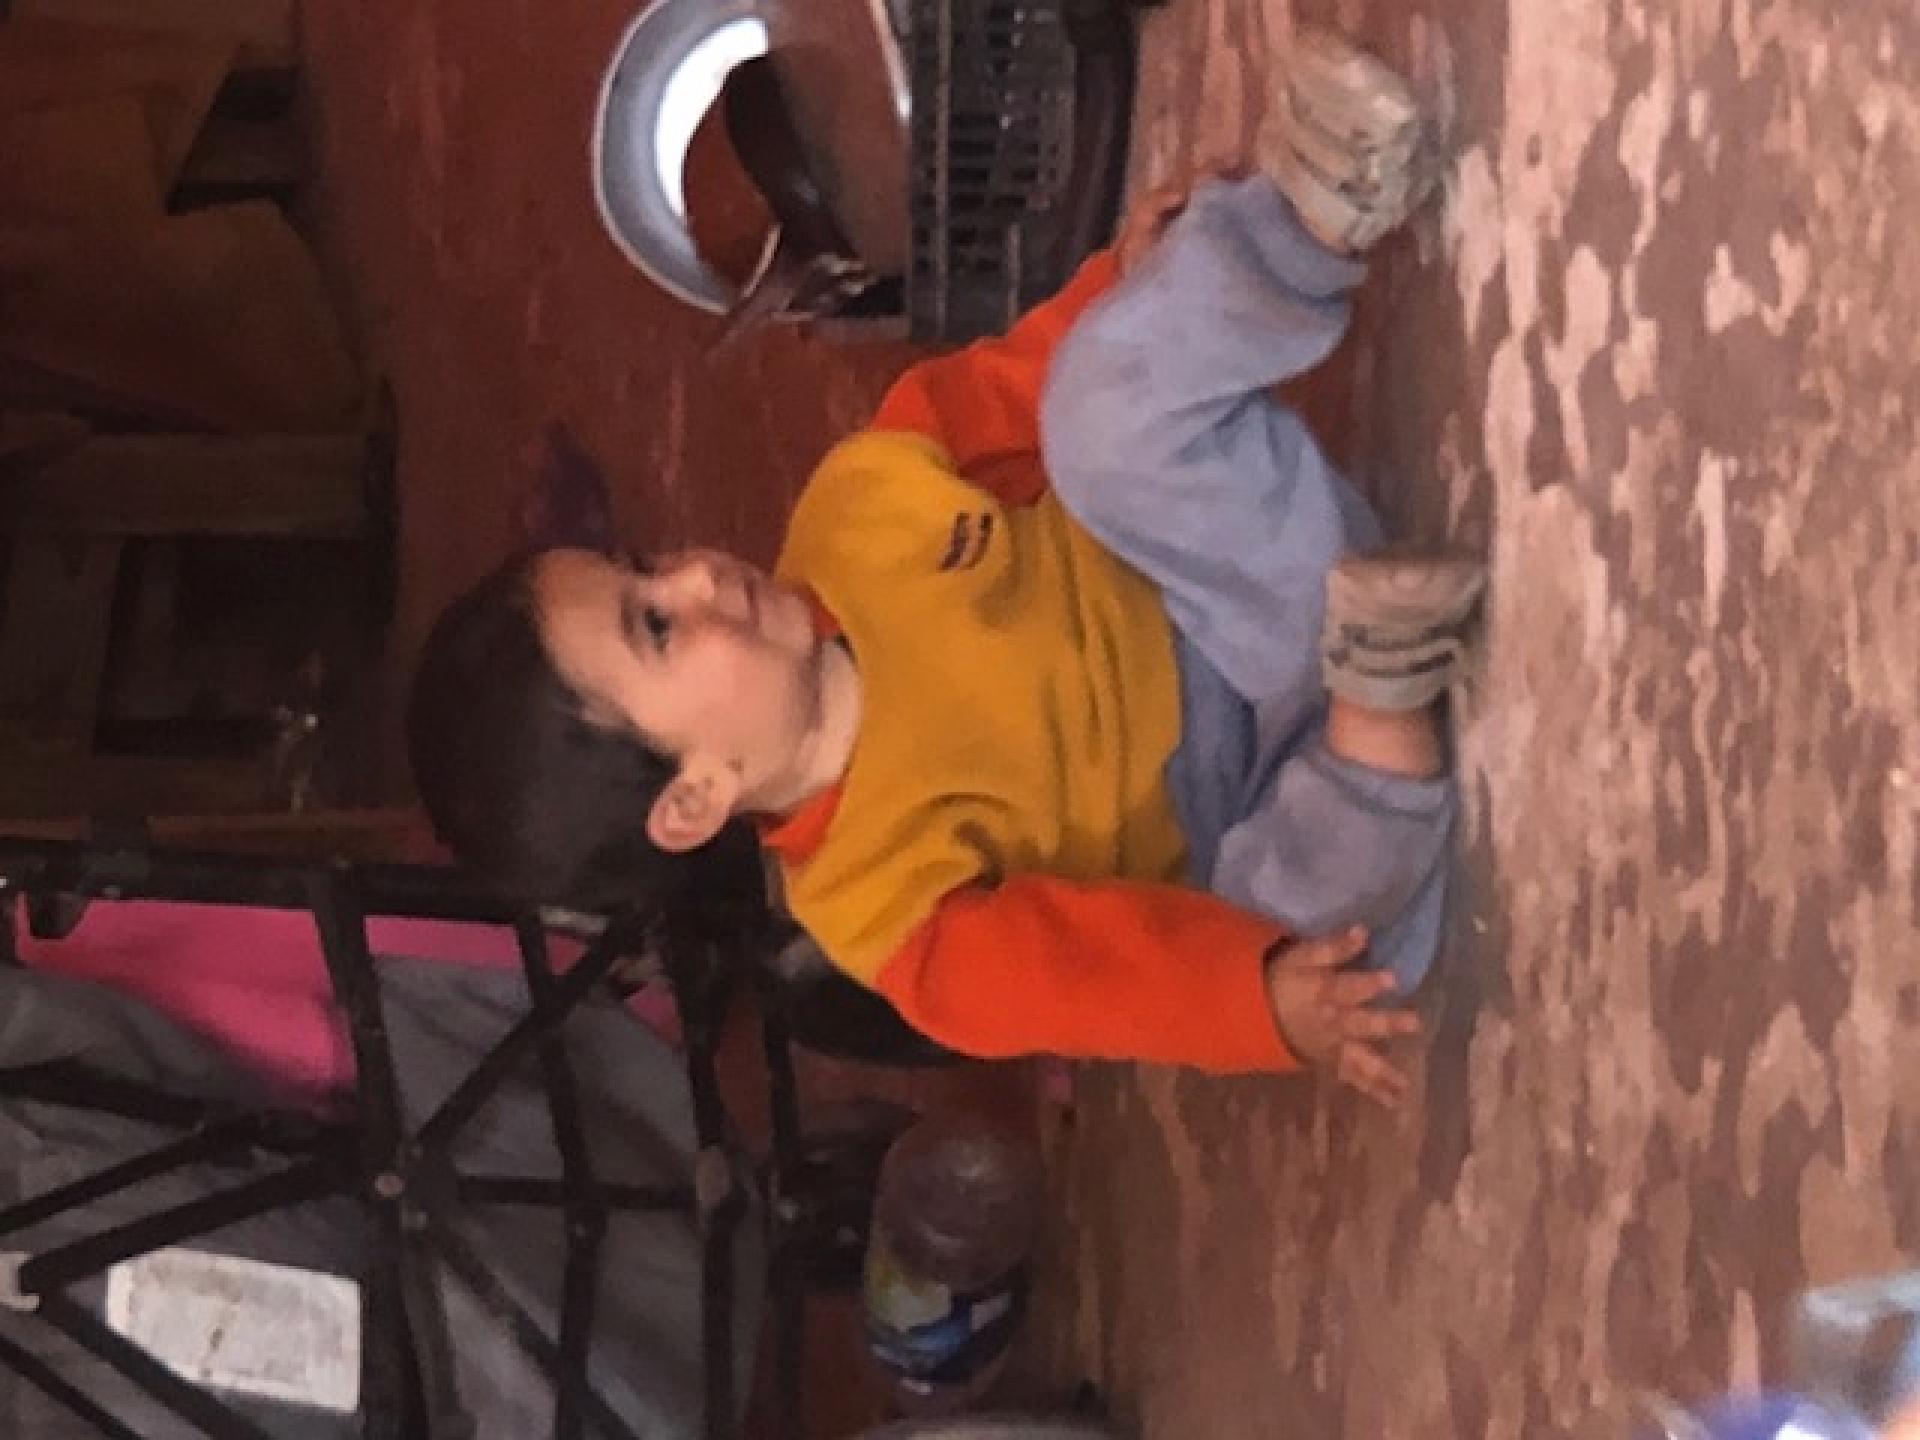 Rami from Makhoul in the Palestinian Jordan Valley – born with heart and lung defects